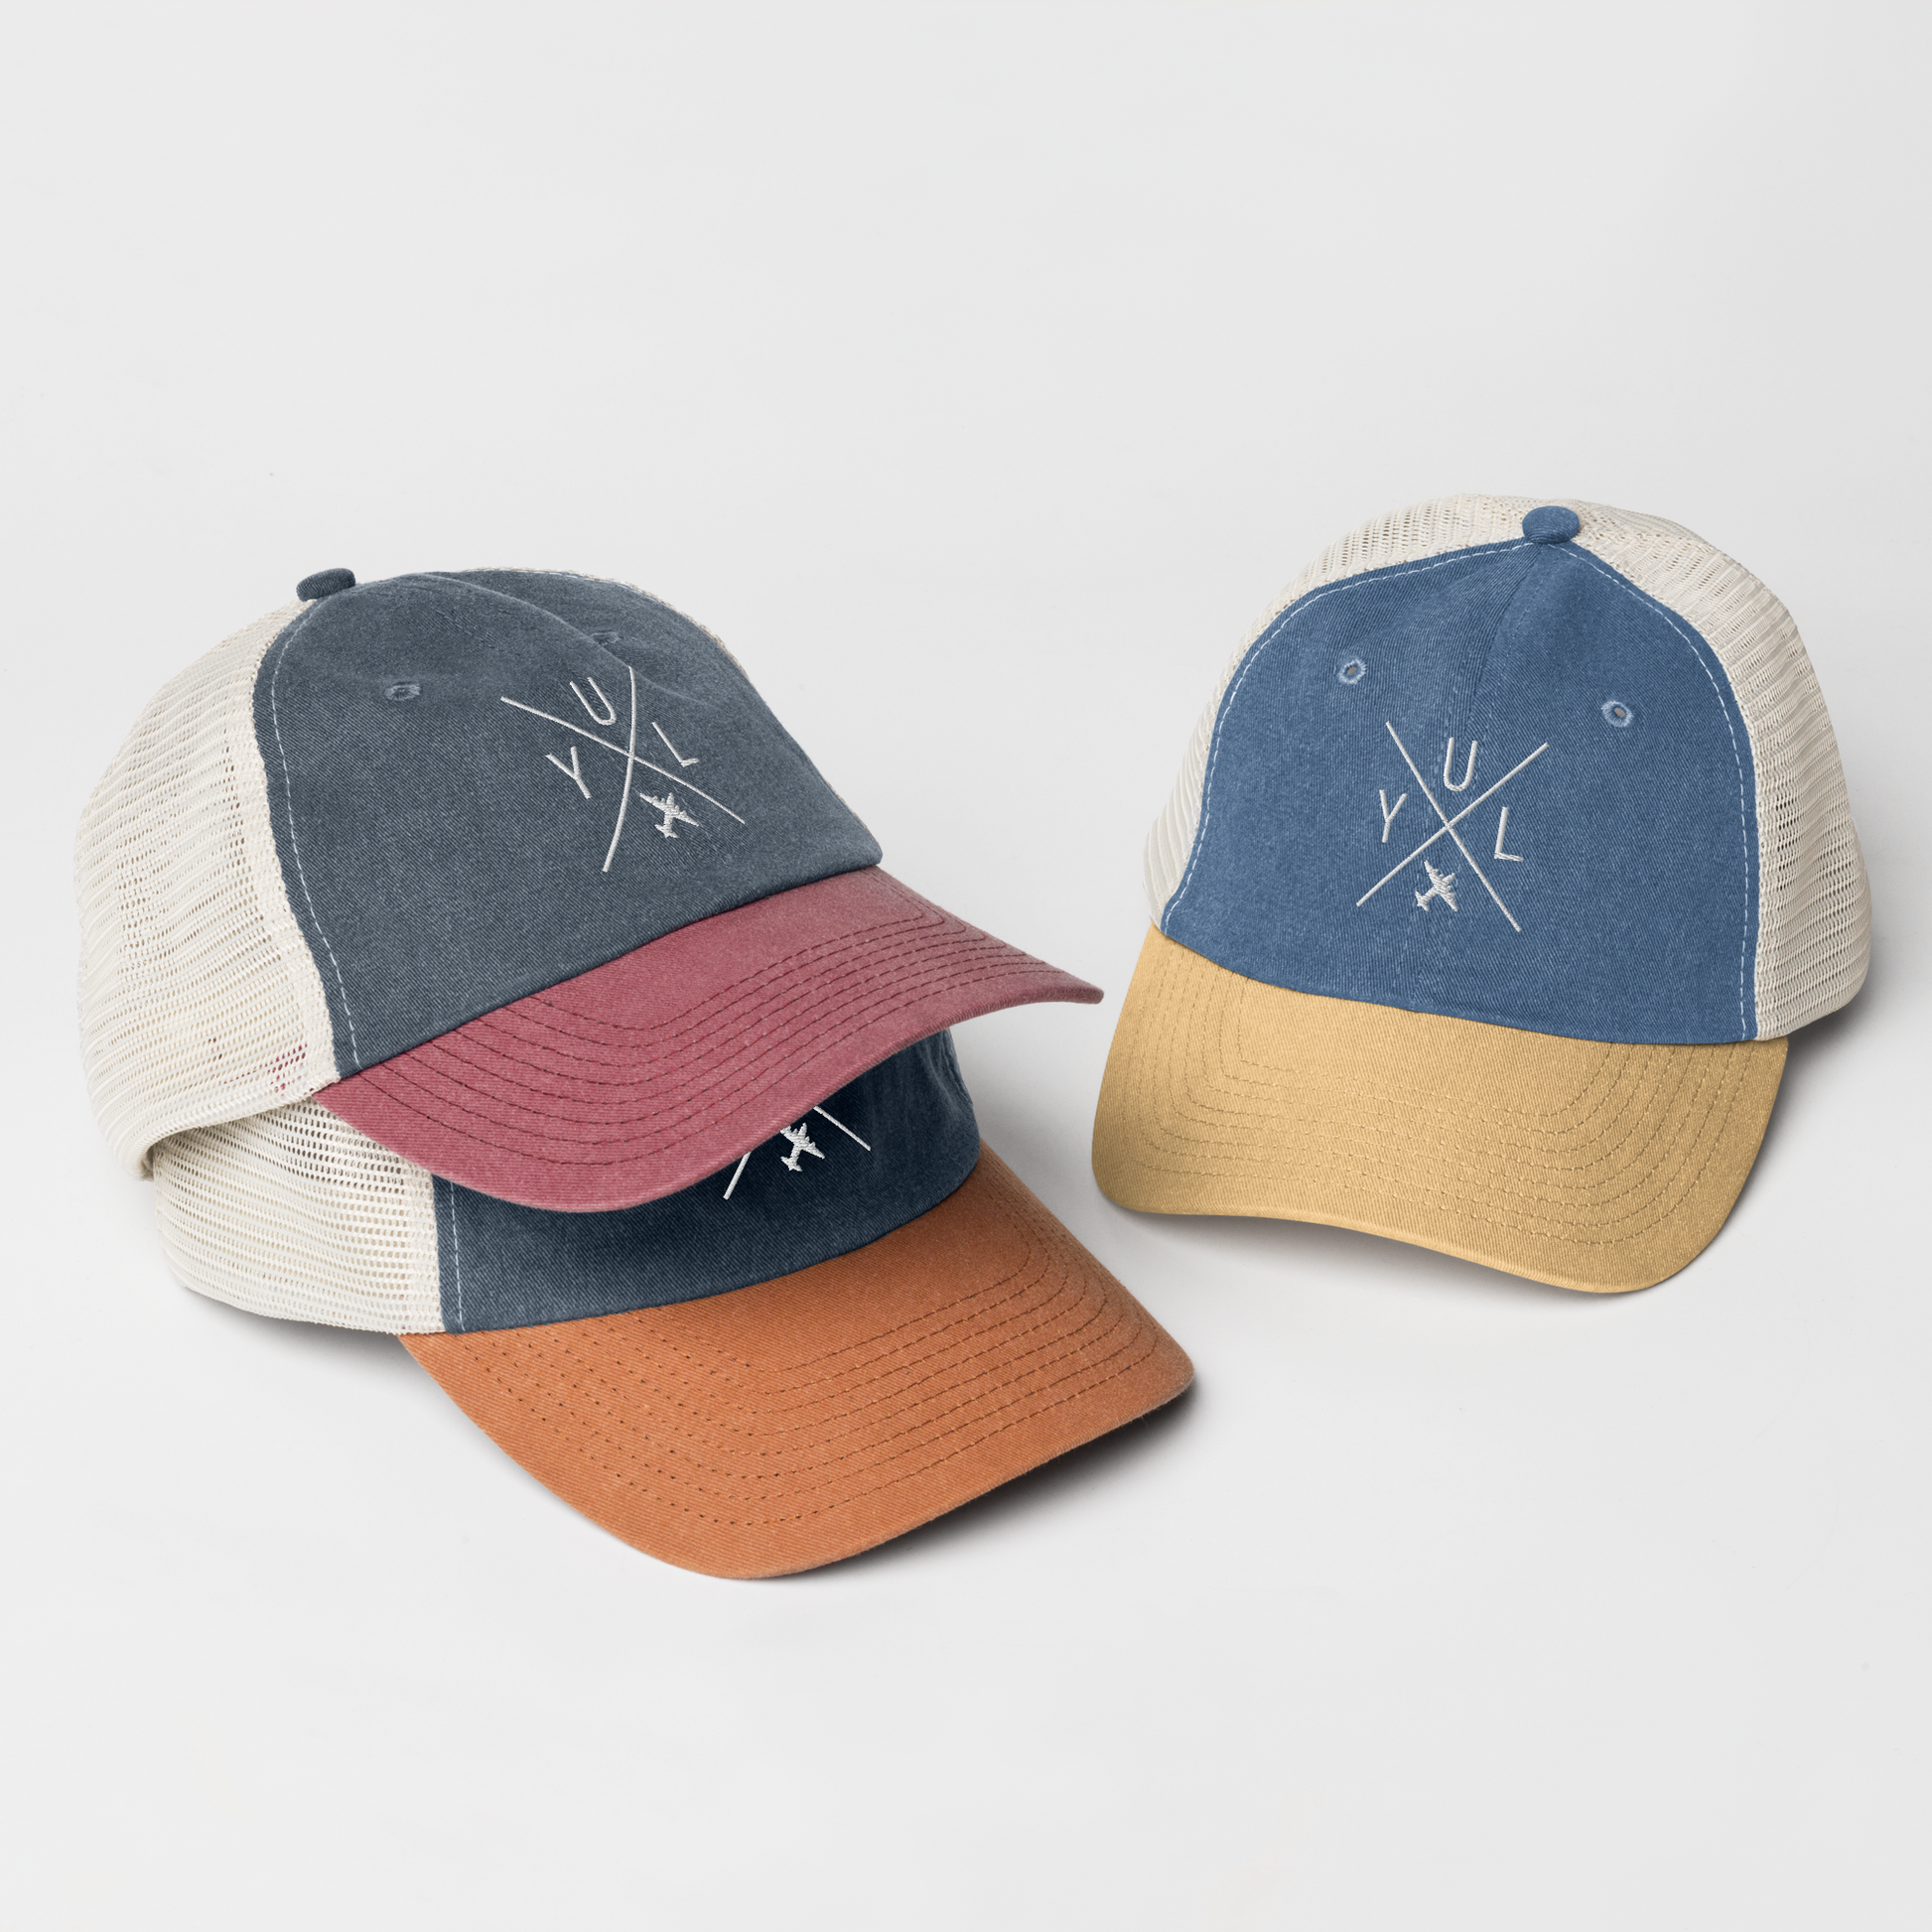 YHM Designs - YUL Montreal Pigment-Dyed Trucker Cap - Crossed-X Design with Airport Code and Vintage Propliner - White Embroidery - Image 05